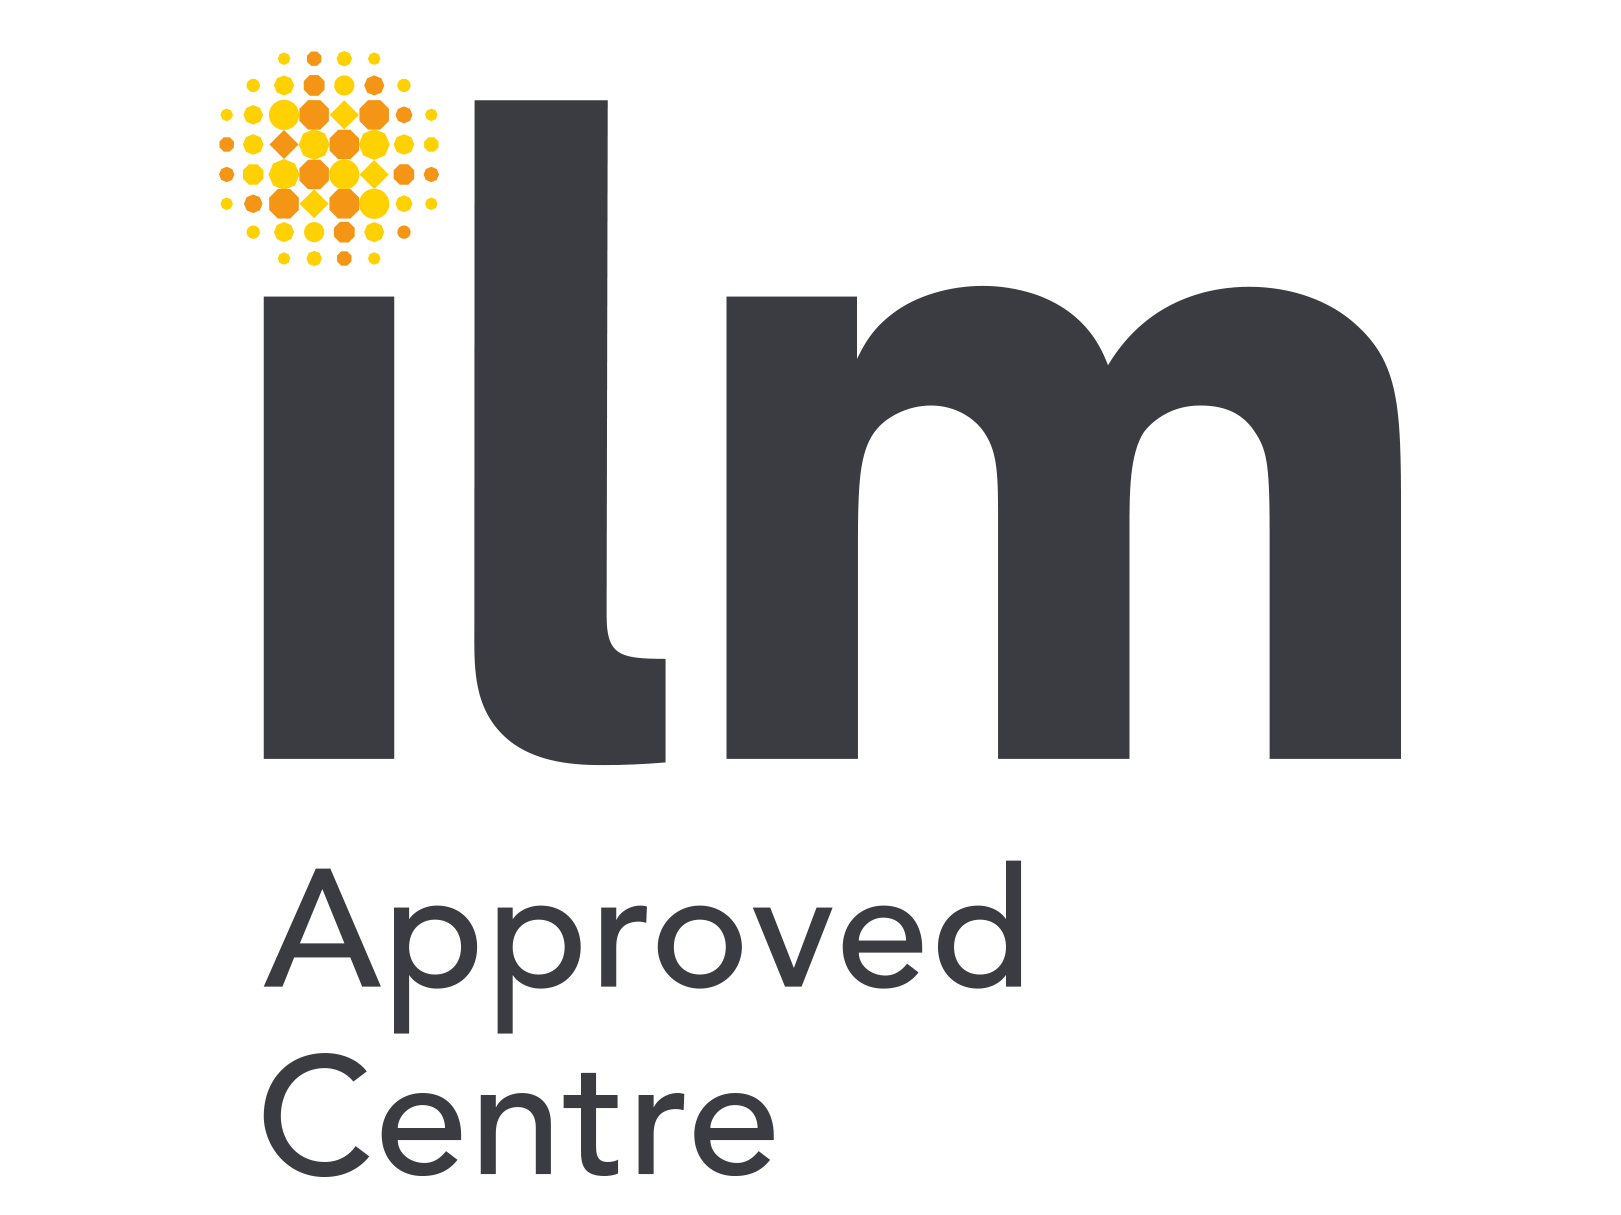 ILM Approved Centre logo